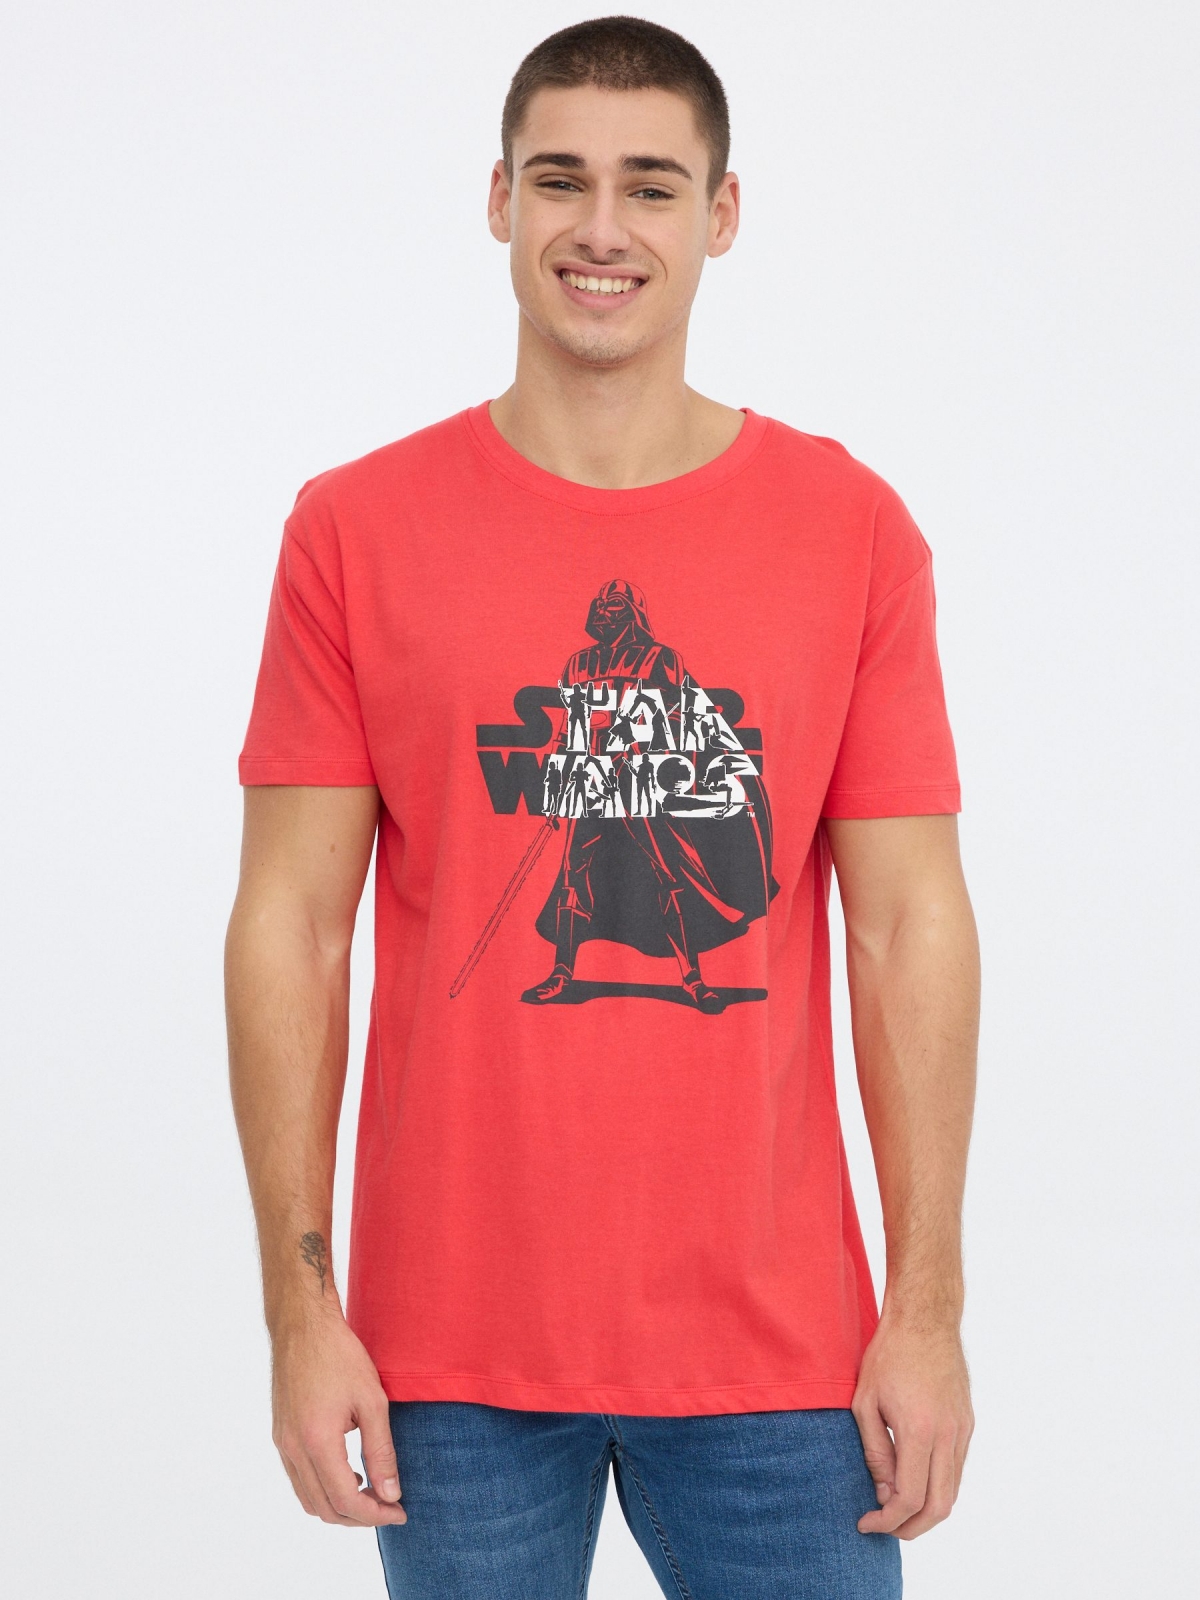 Star Wars t-shirt red middle front view